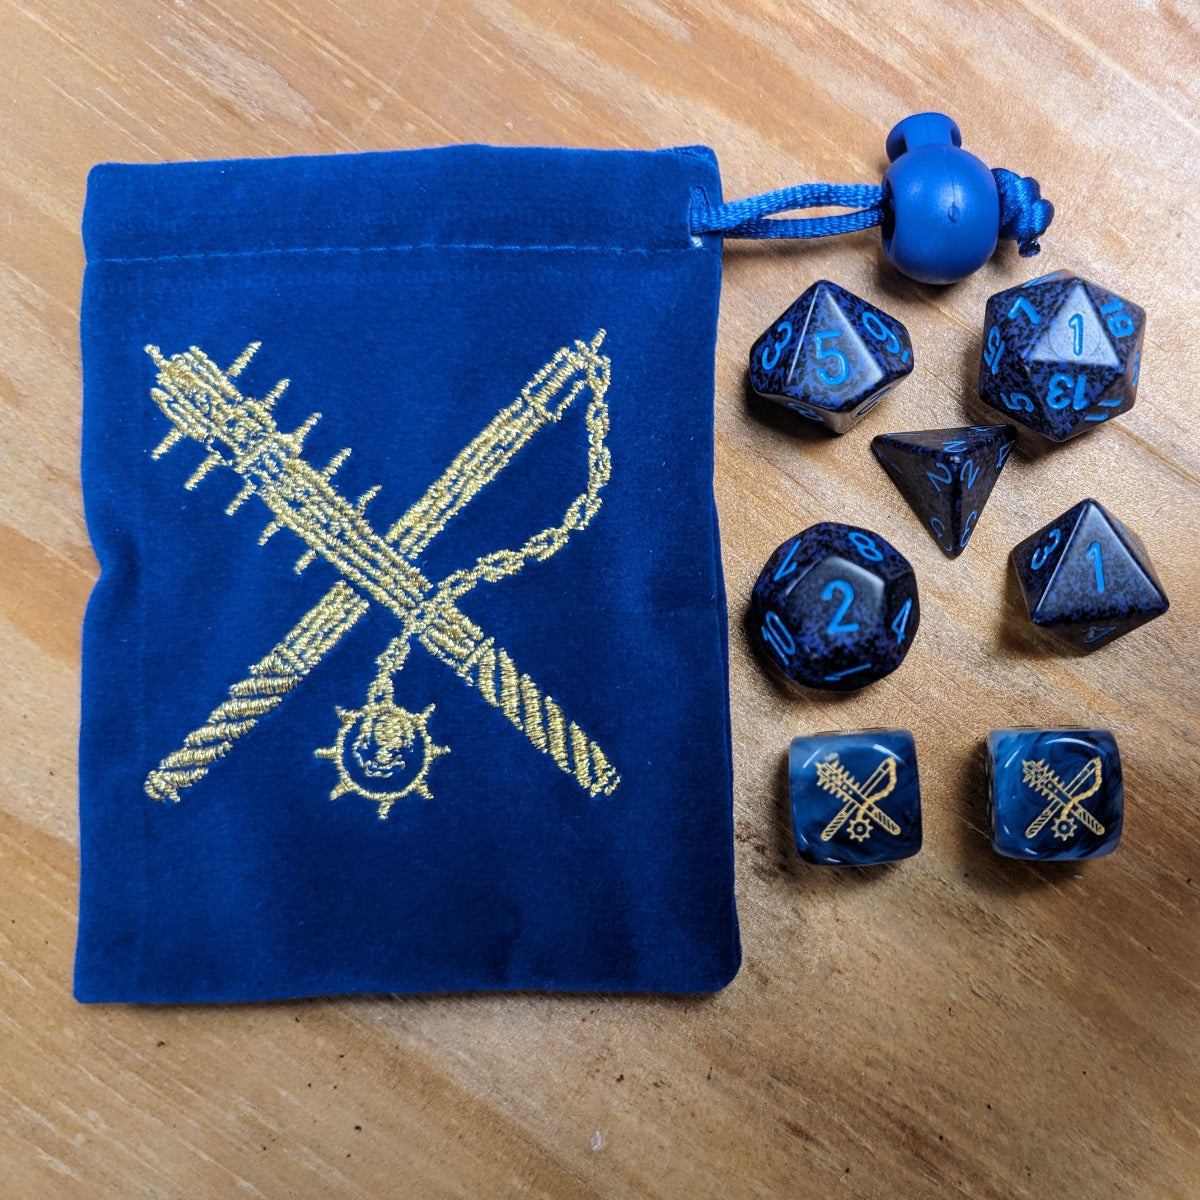 OUT OF SEASON 7x Dice Set with Embroidered Bag [Blue/Gold colorway]